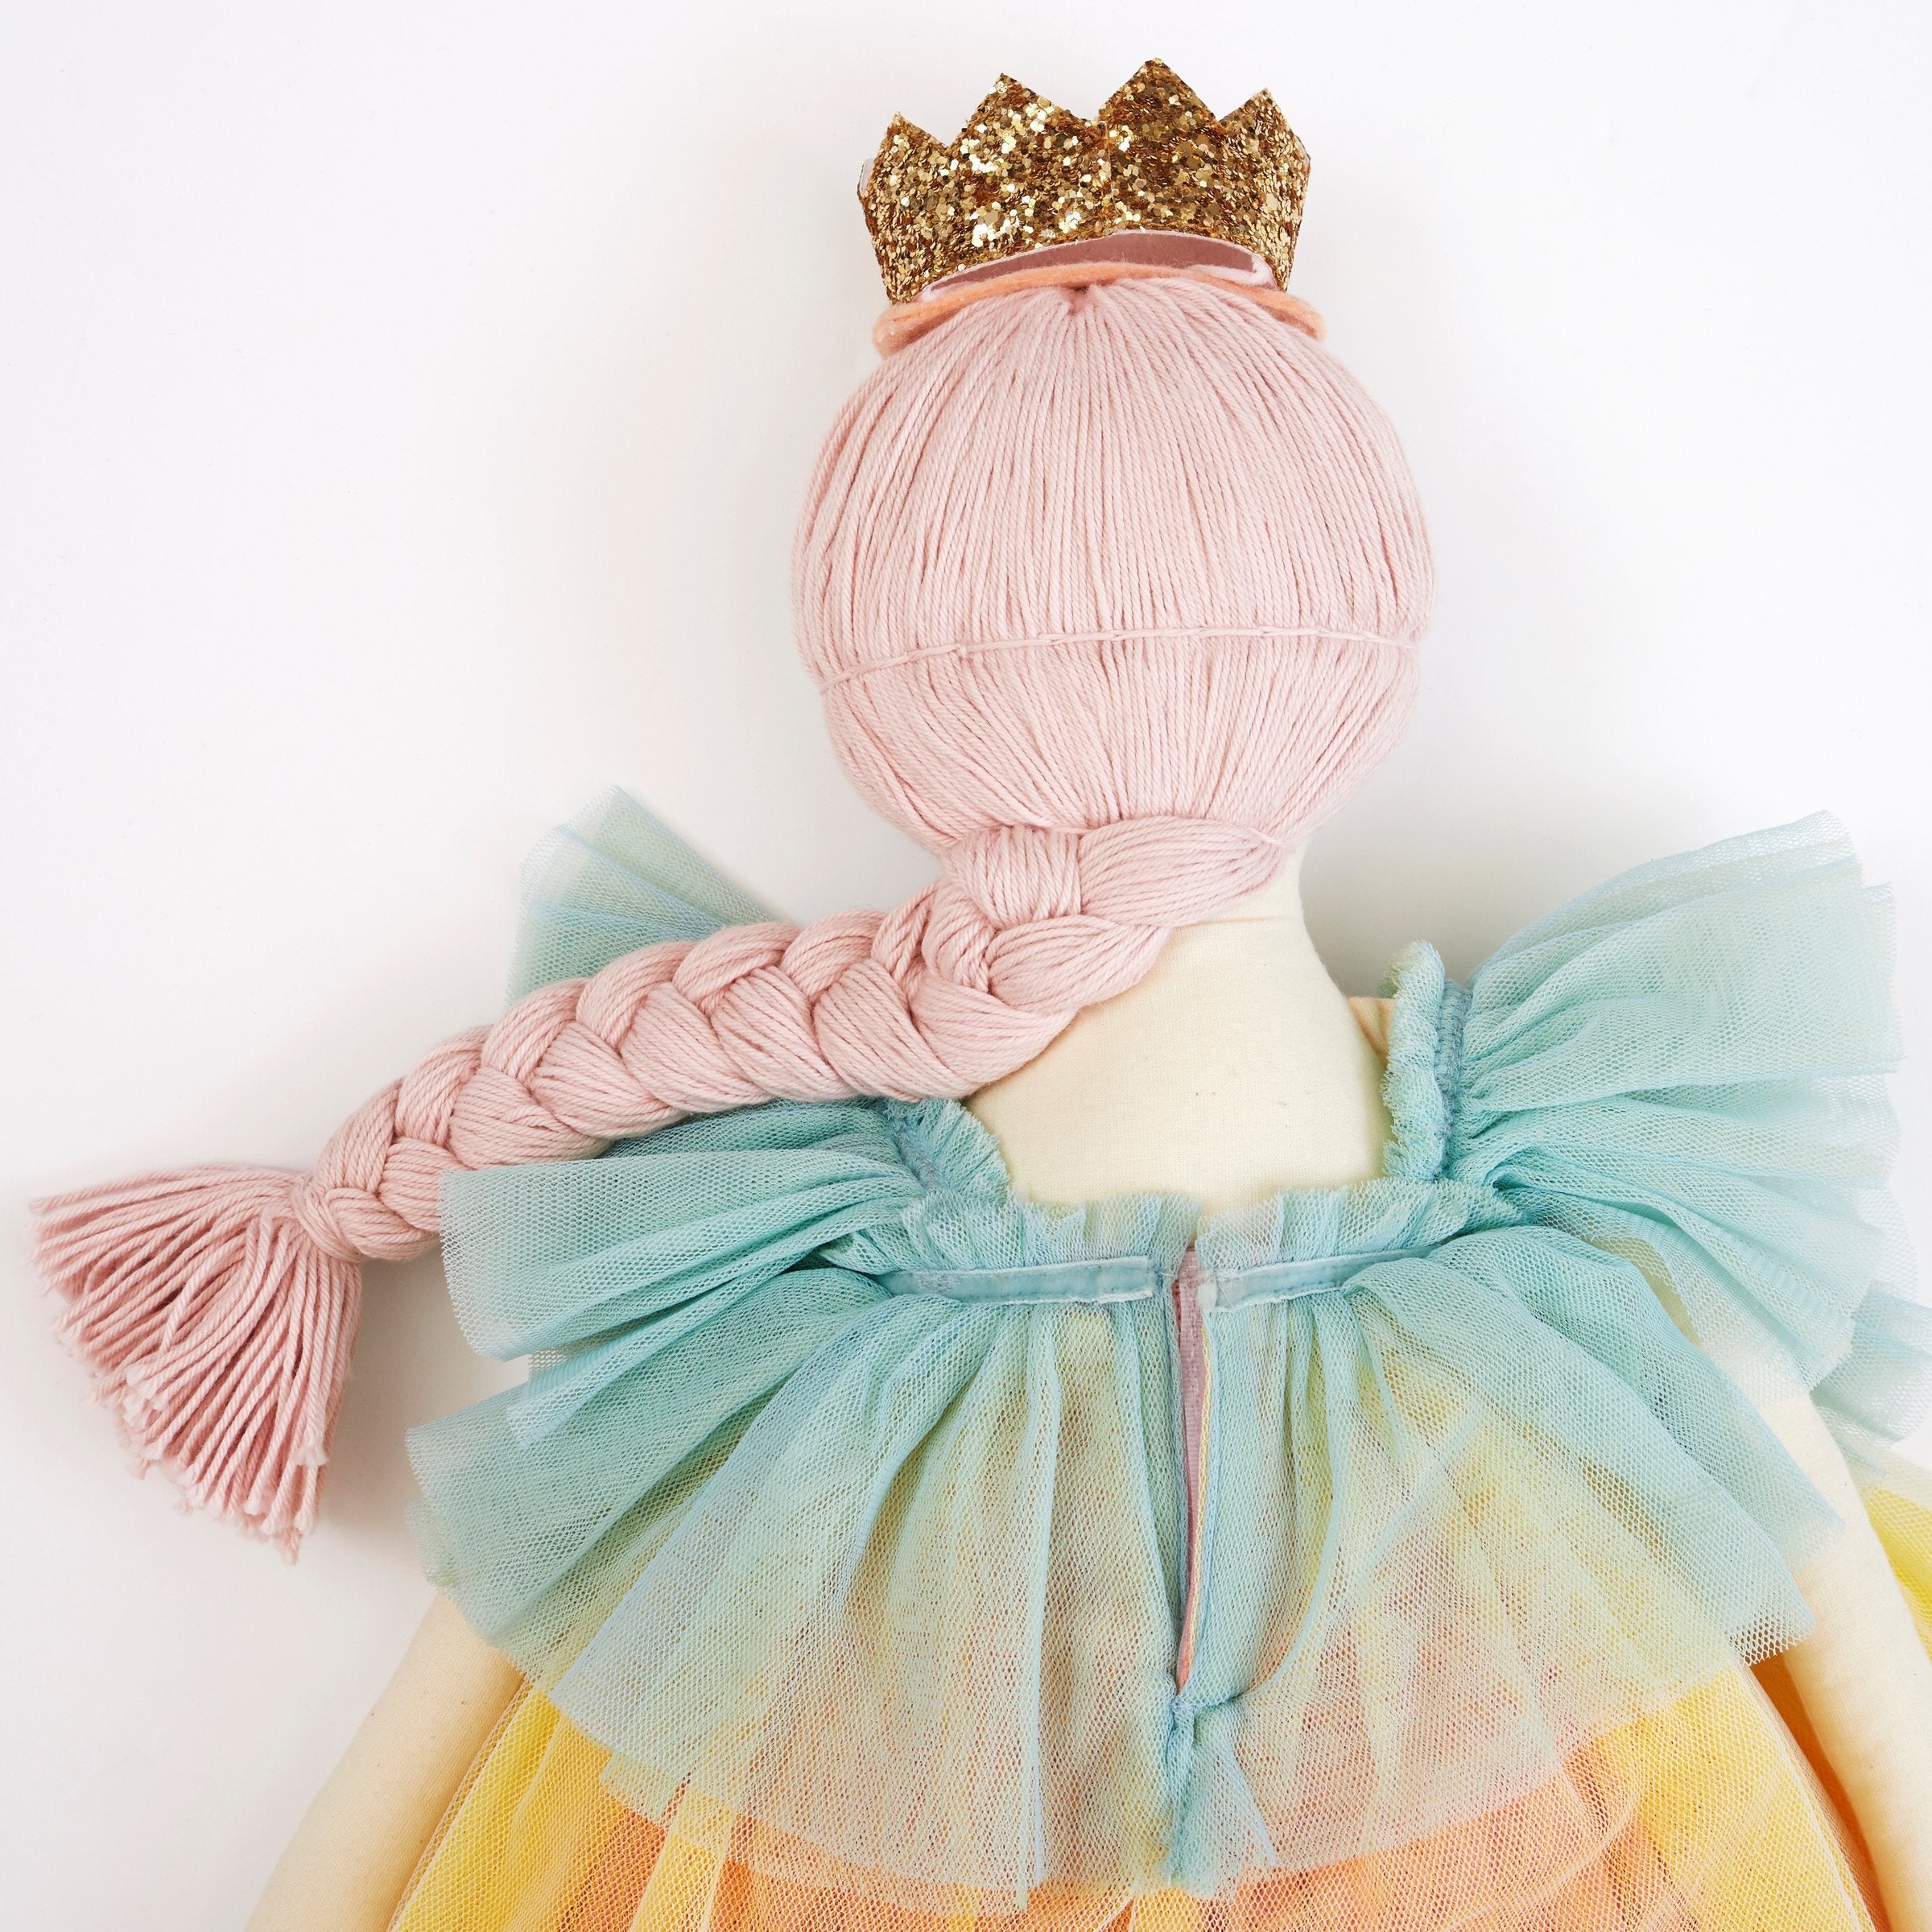 Gemma is a stunning princess toy with a tulle dress and gold crown.